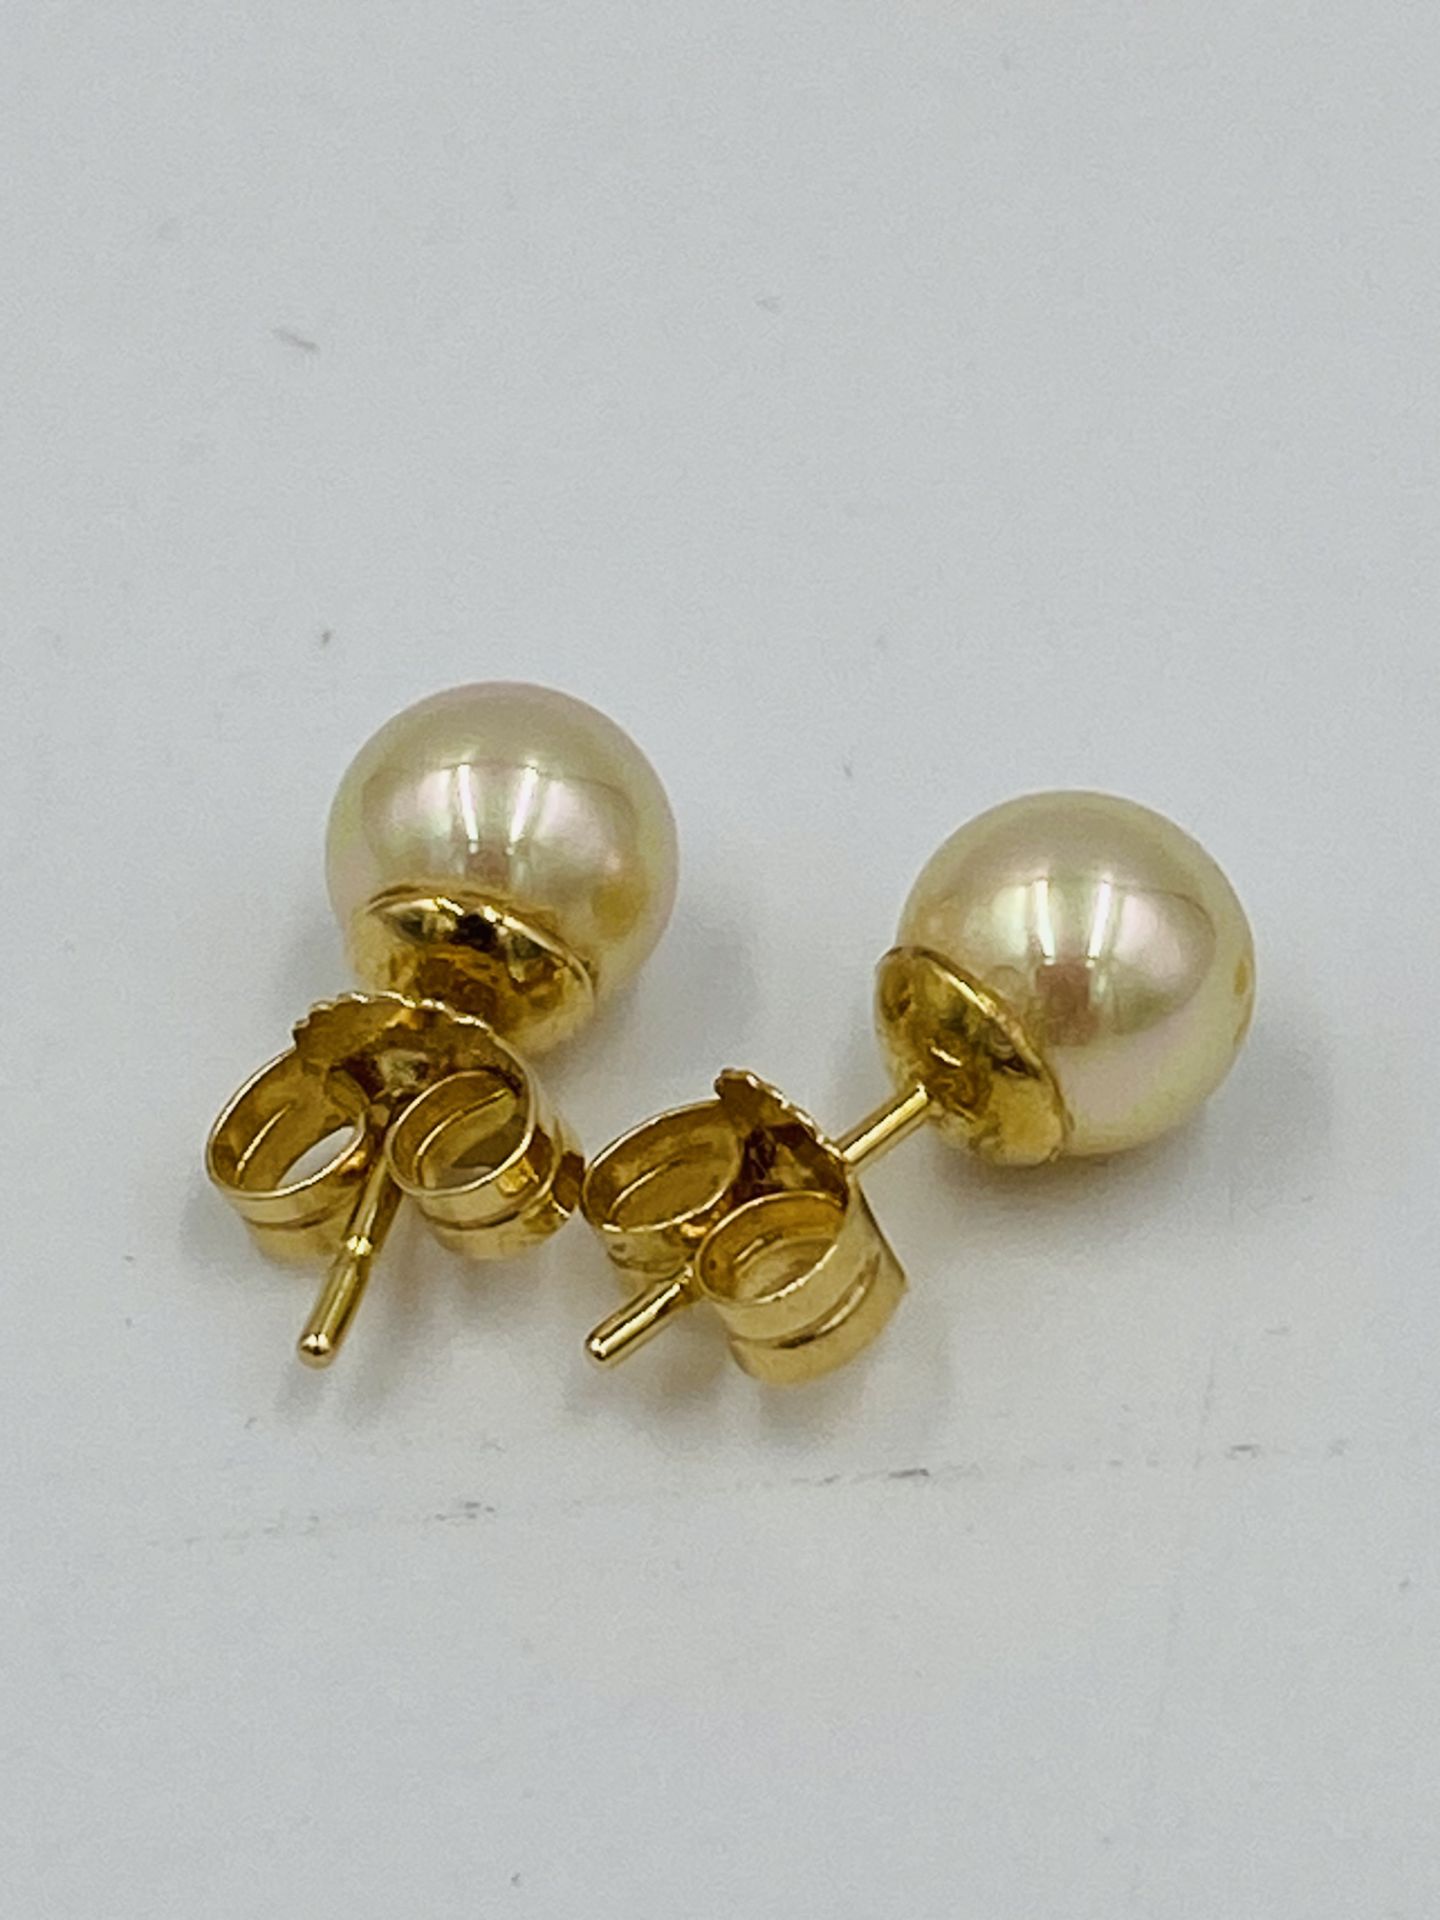 Pair of 18ct gold earrings set with a pearl - Image 3 of 4